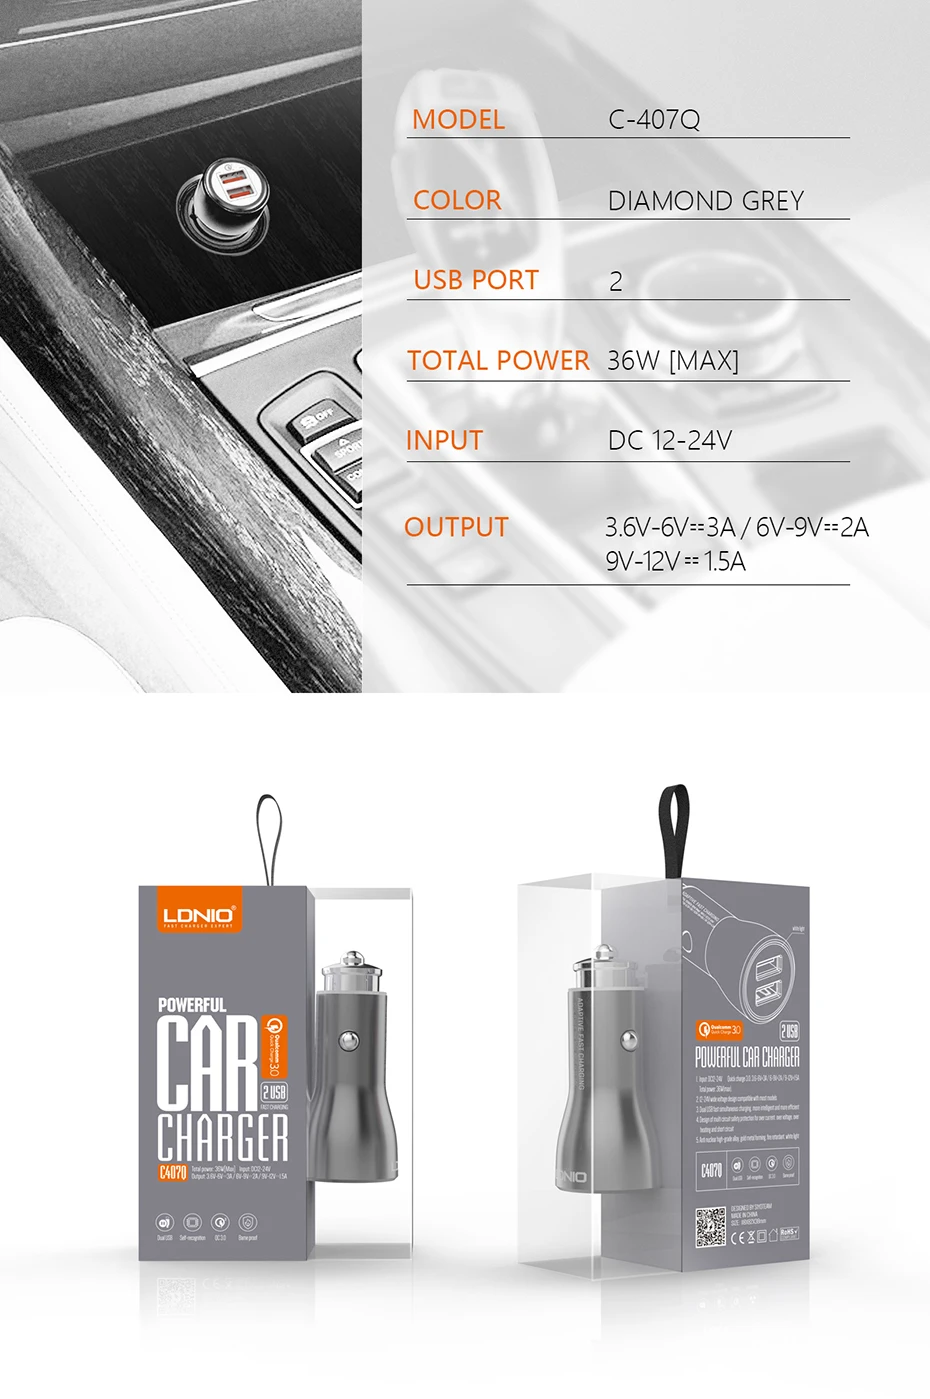 LDNIO Car charger (10)